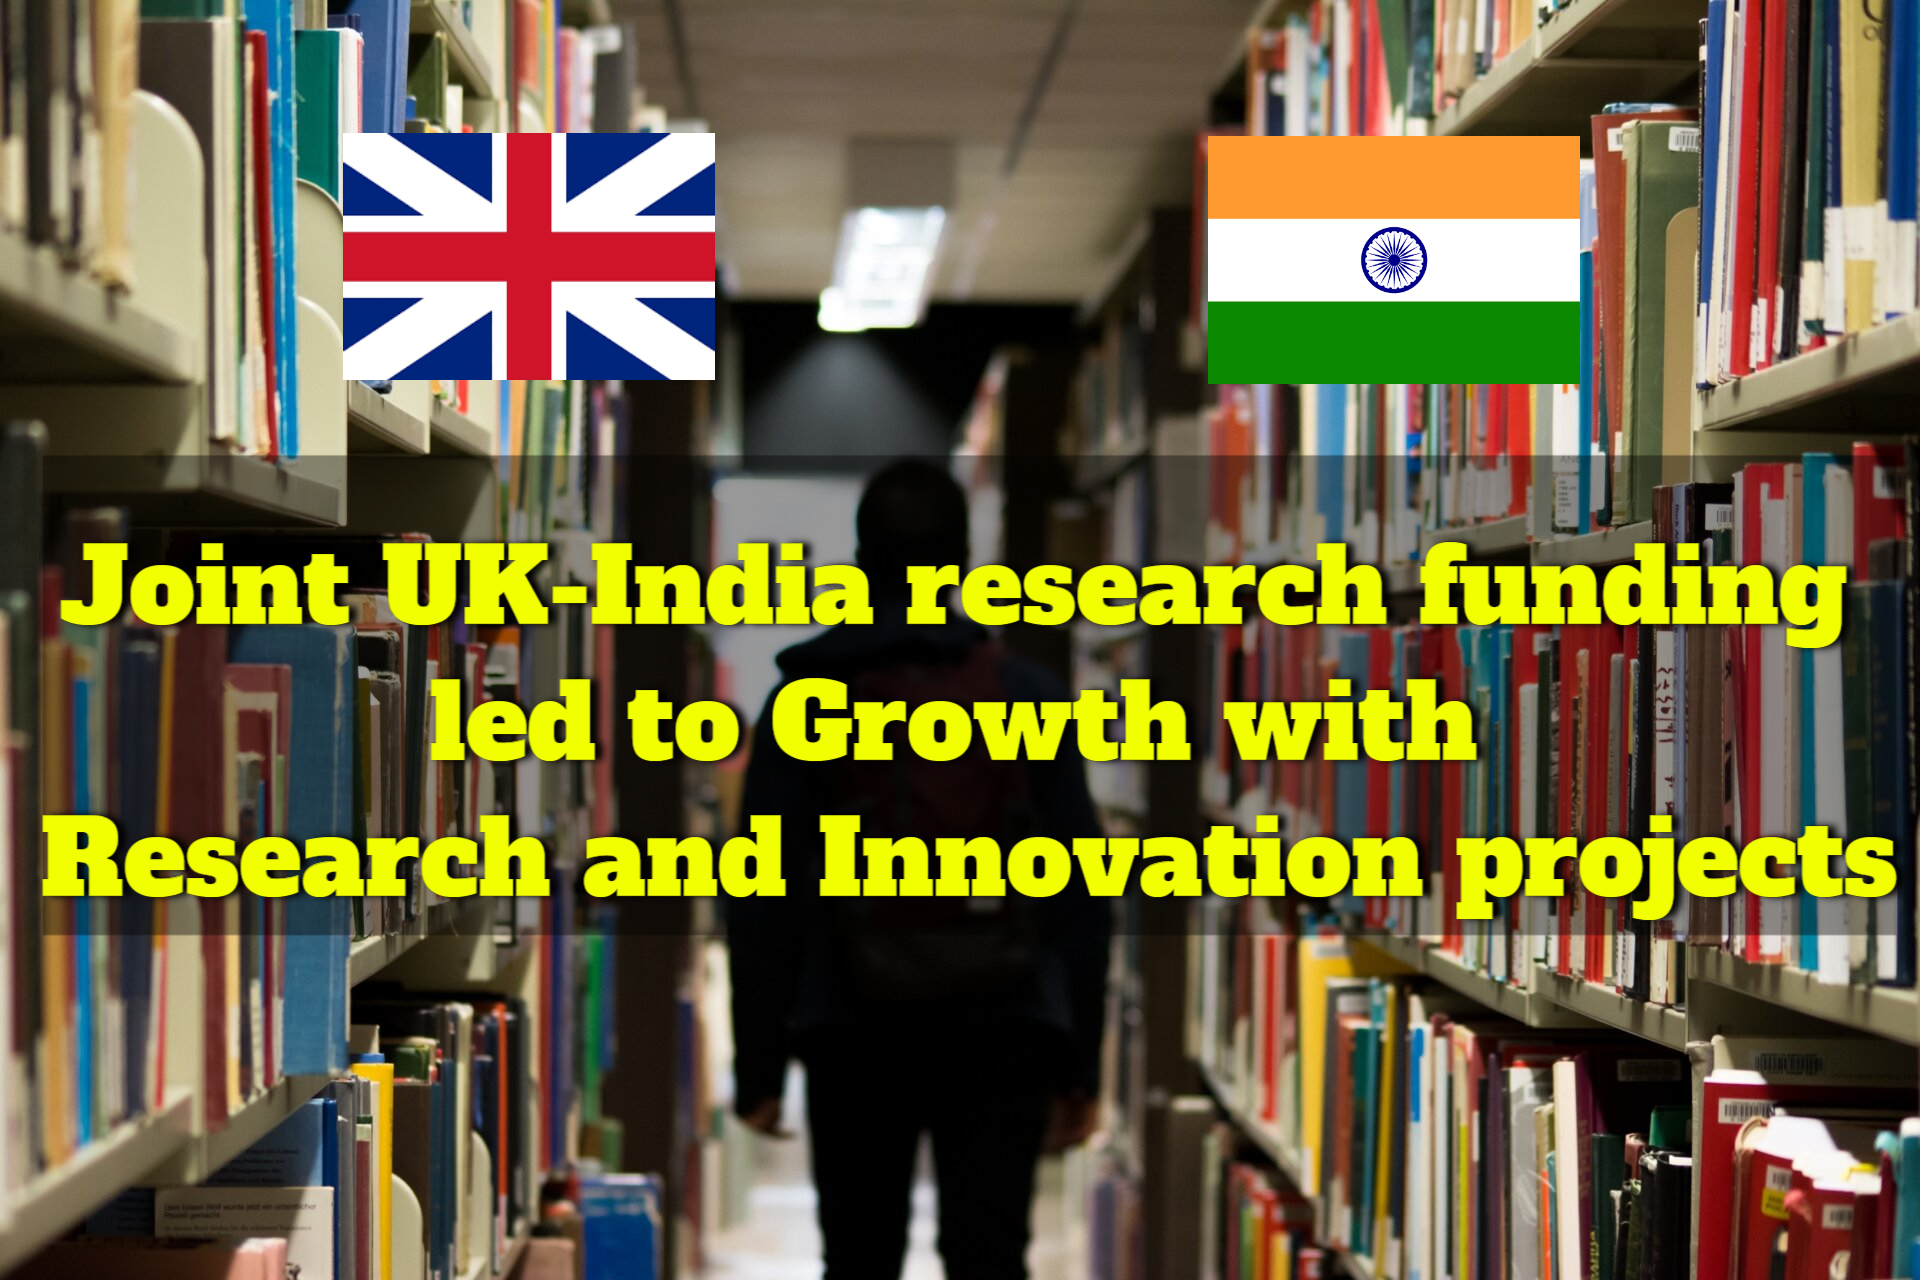 The joint UK-India research funding led to 258 Growth with Research and Innovation projects.